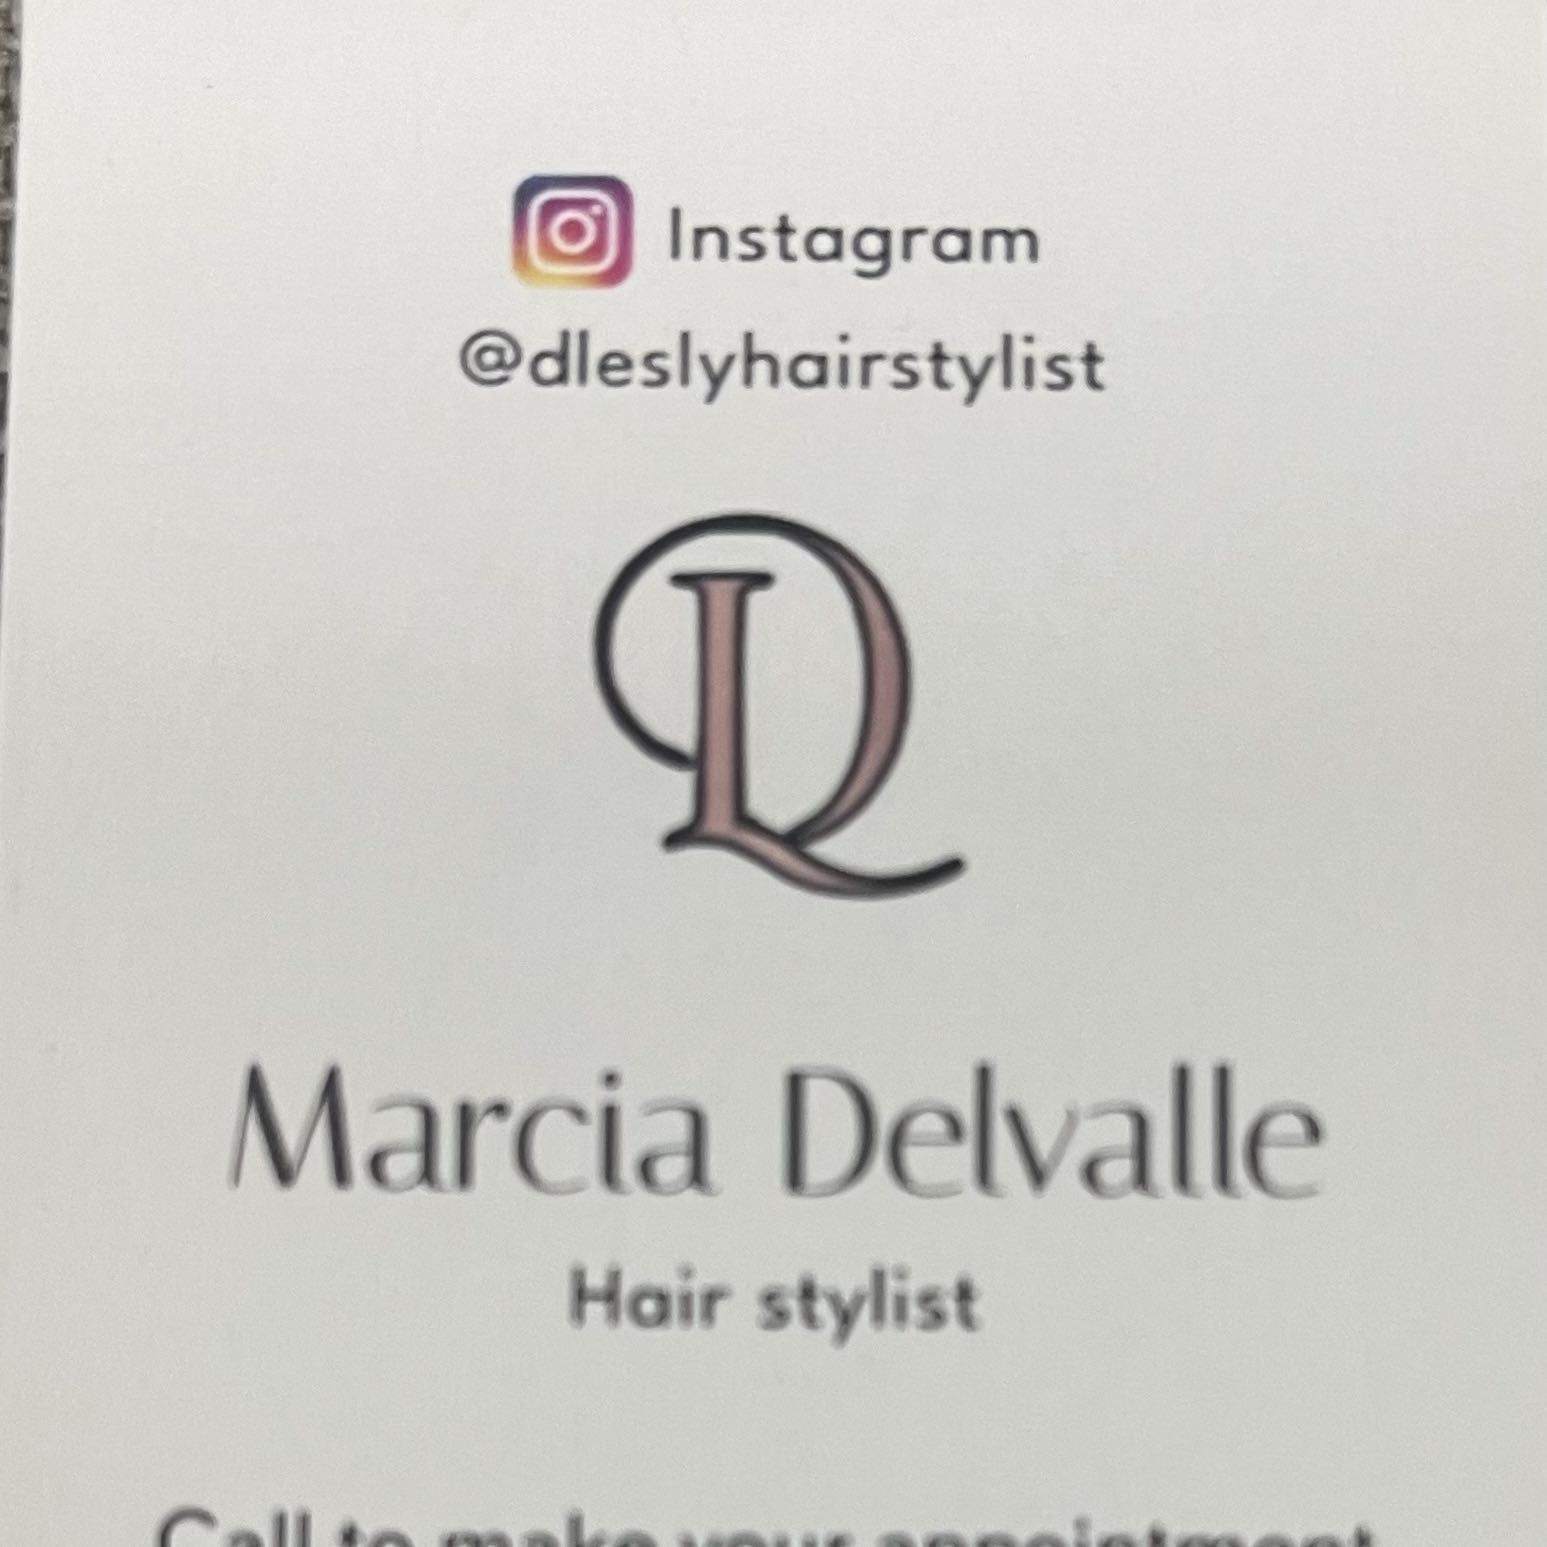 D’Lesly hair stylist, 1621 N John Young Pkwy, 10, Kissimmee, 34741